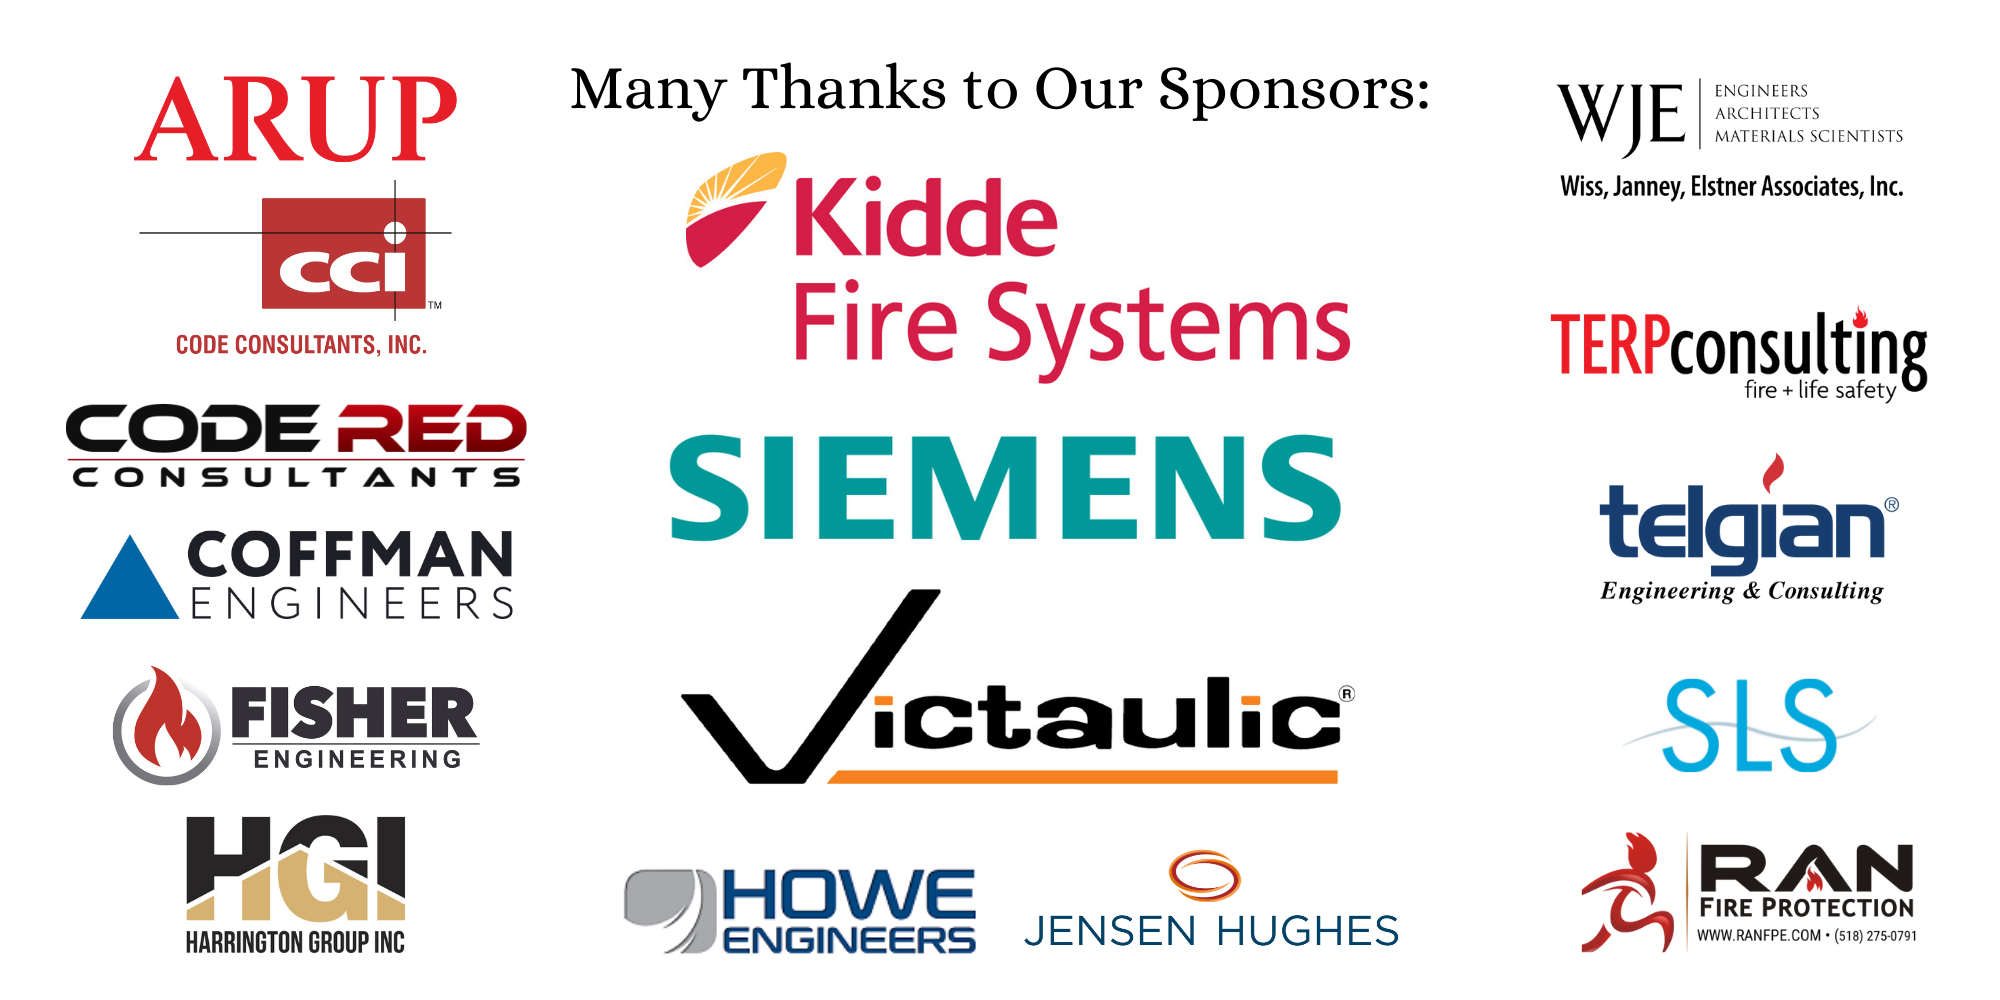 many thanks to our sponsors